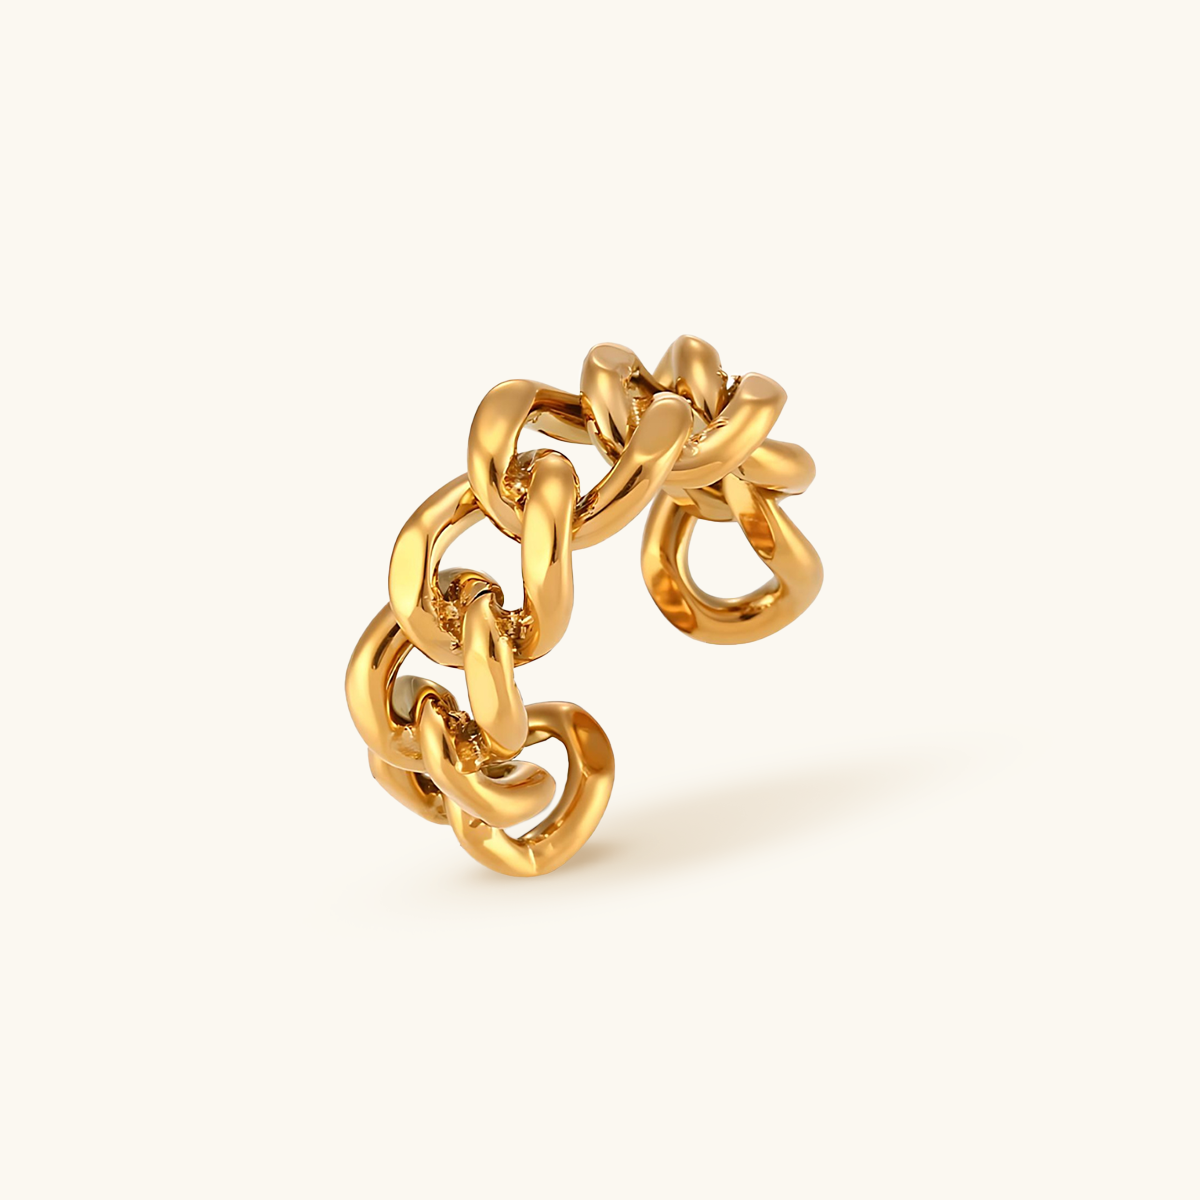 Adjustable Size Curb Ring - Gold